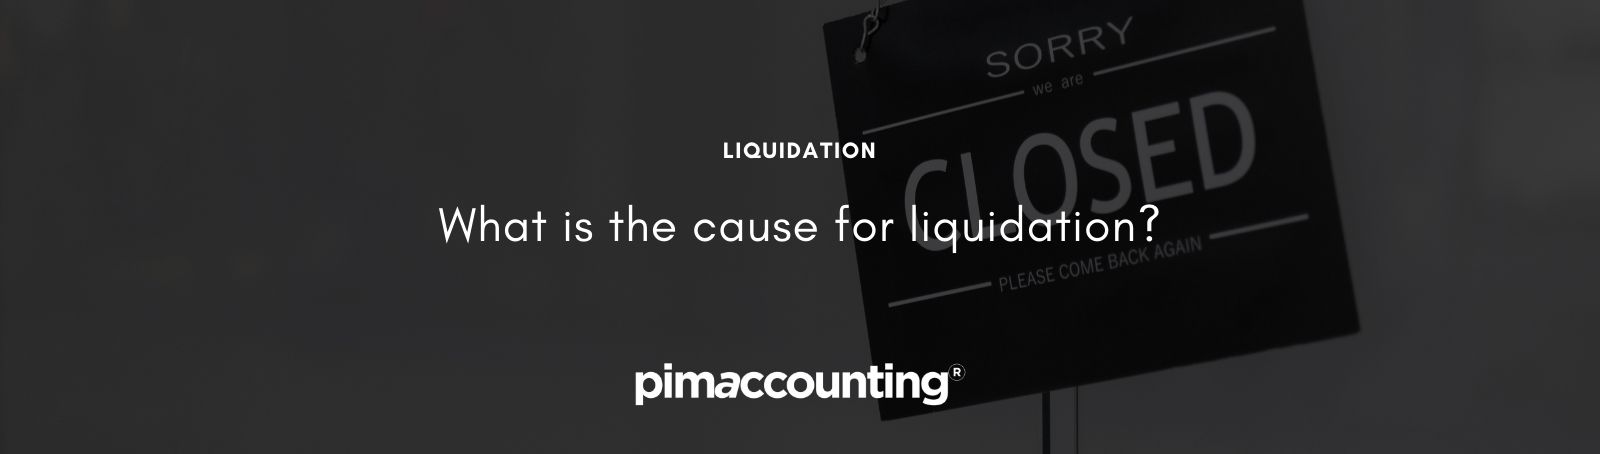 What is the cause for liquidation?